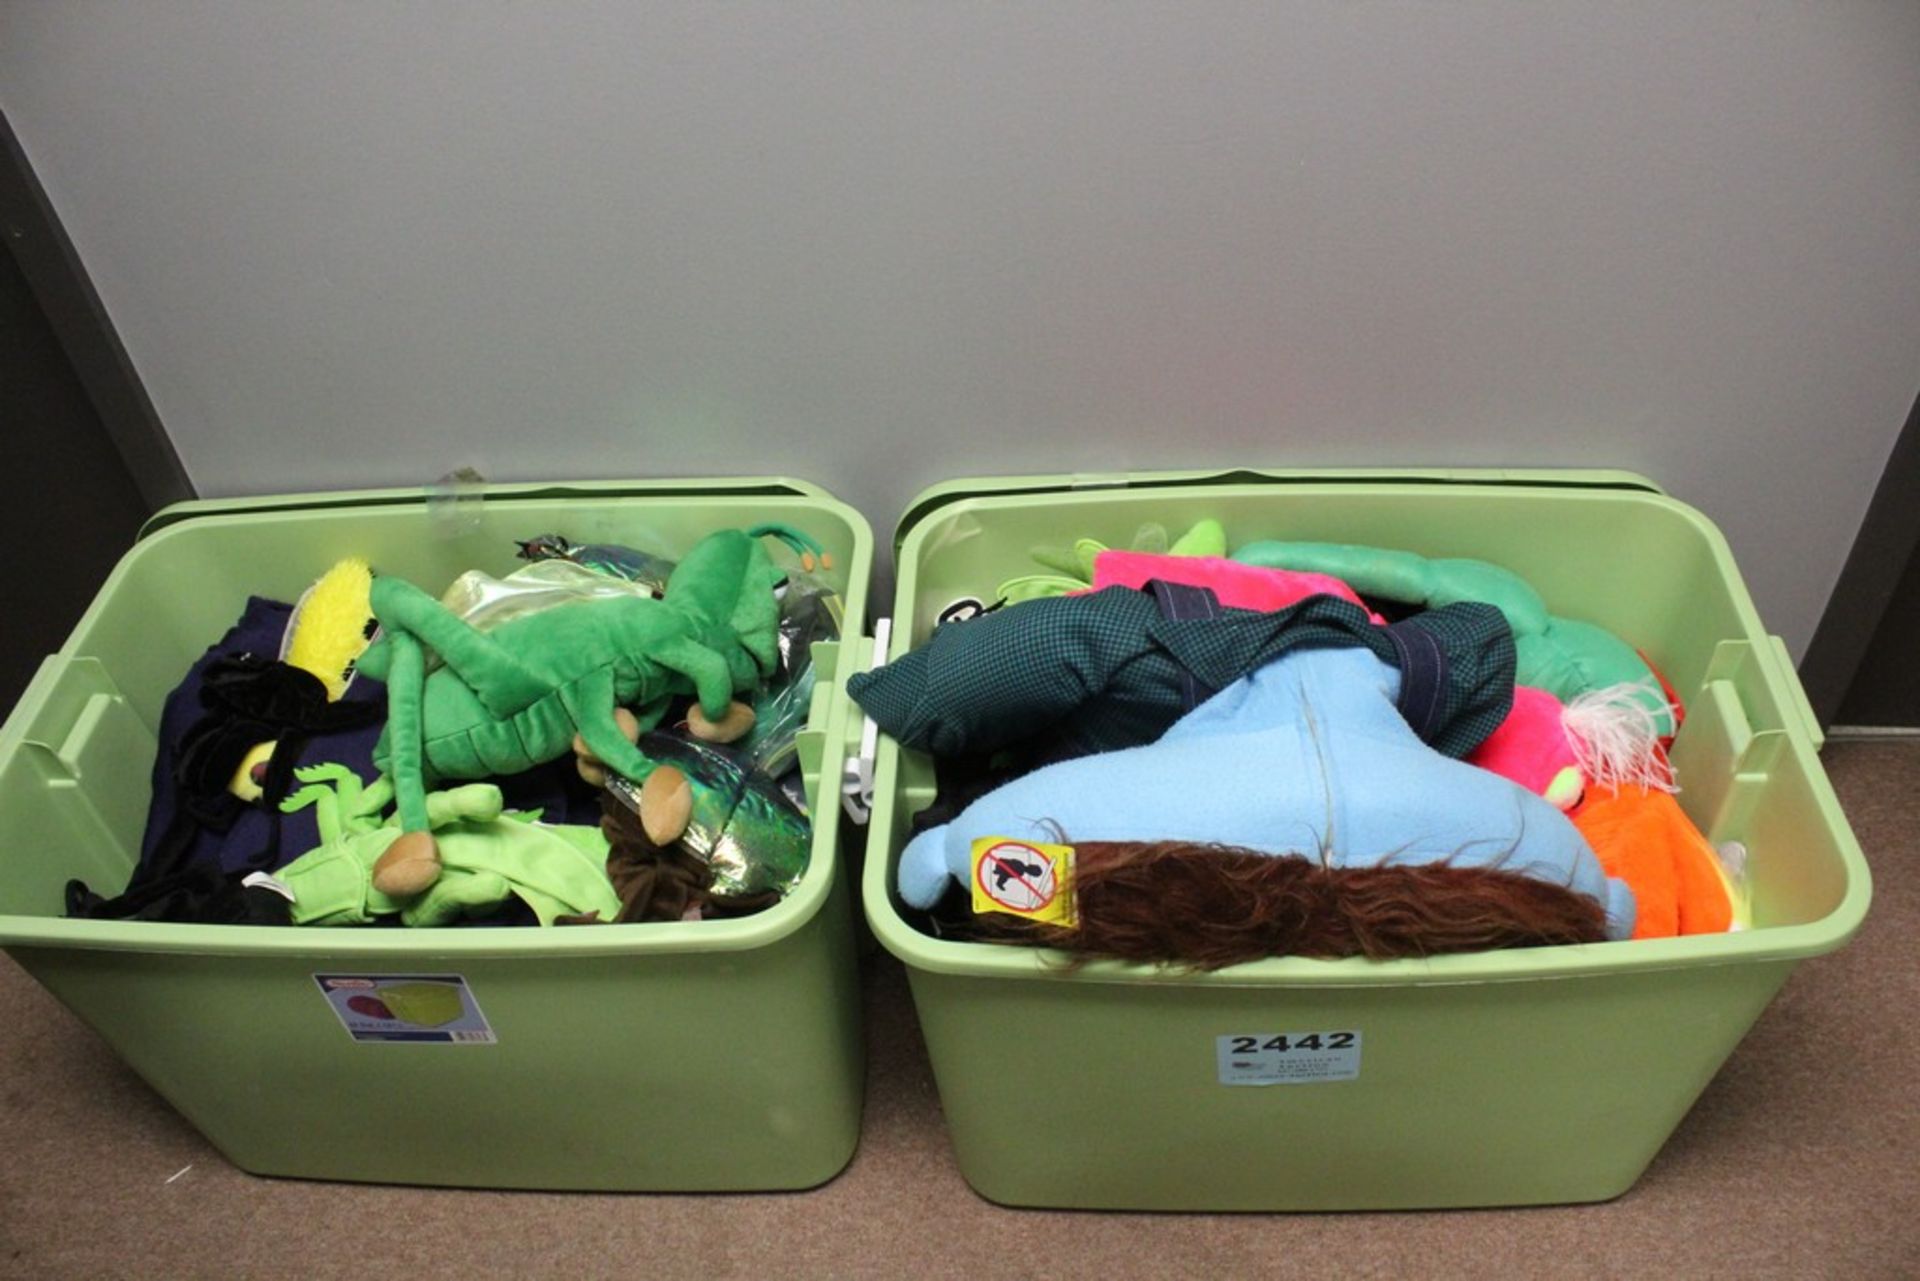 ASSORTED STUFFED ANIMAL DECORATIONS IN TWO BINS